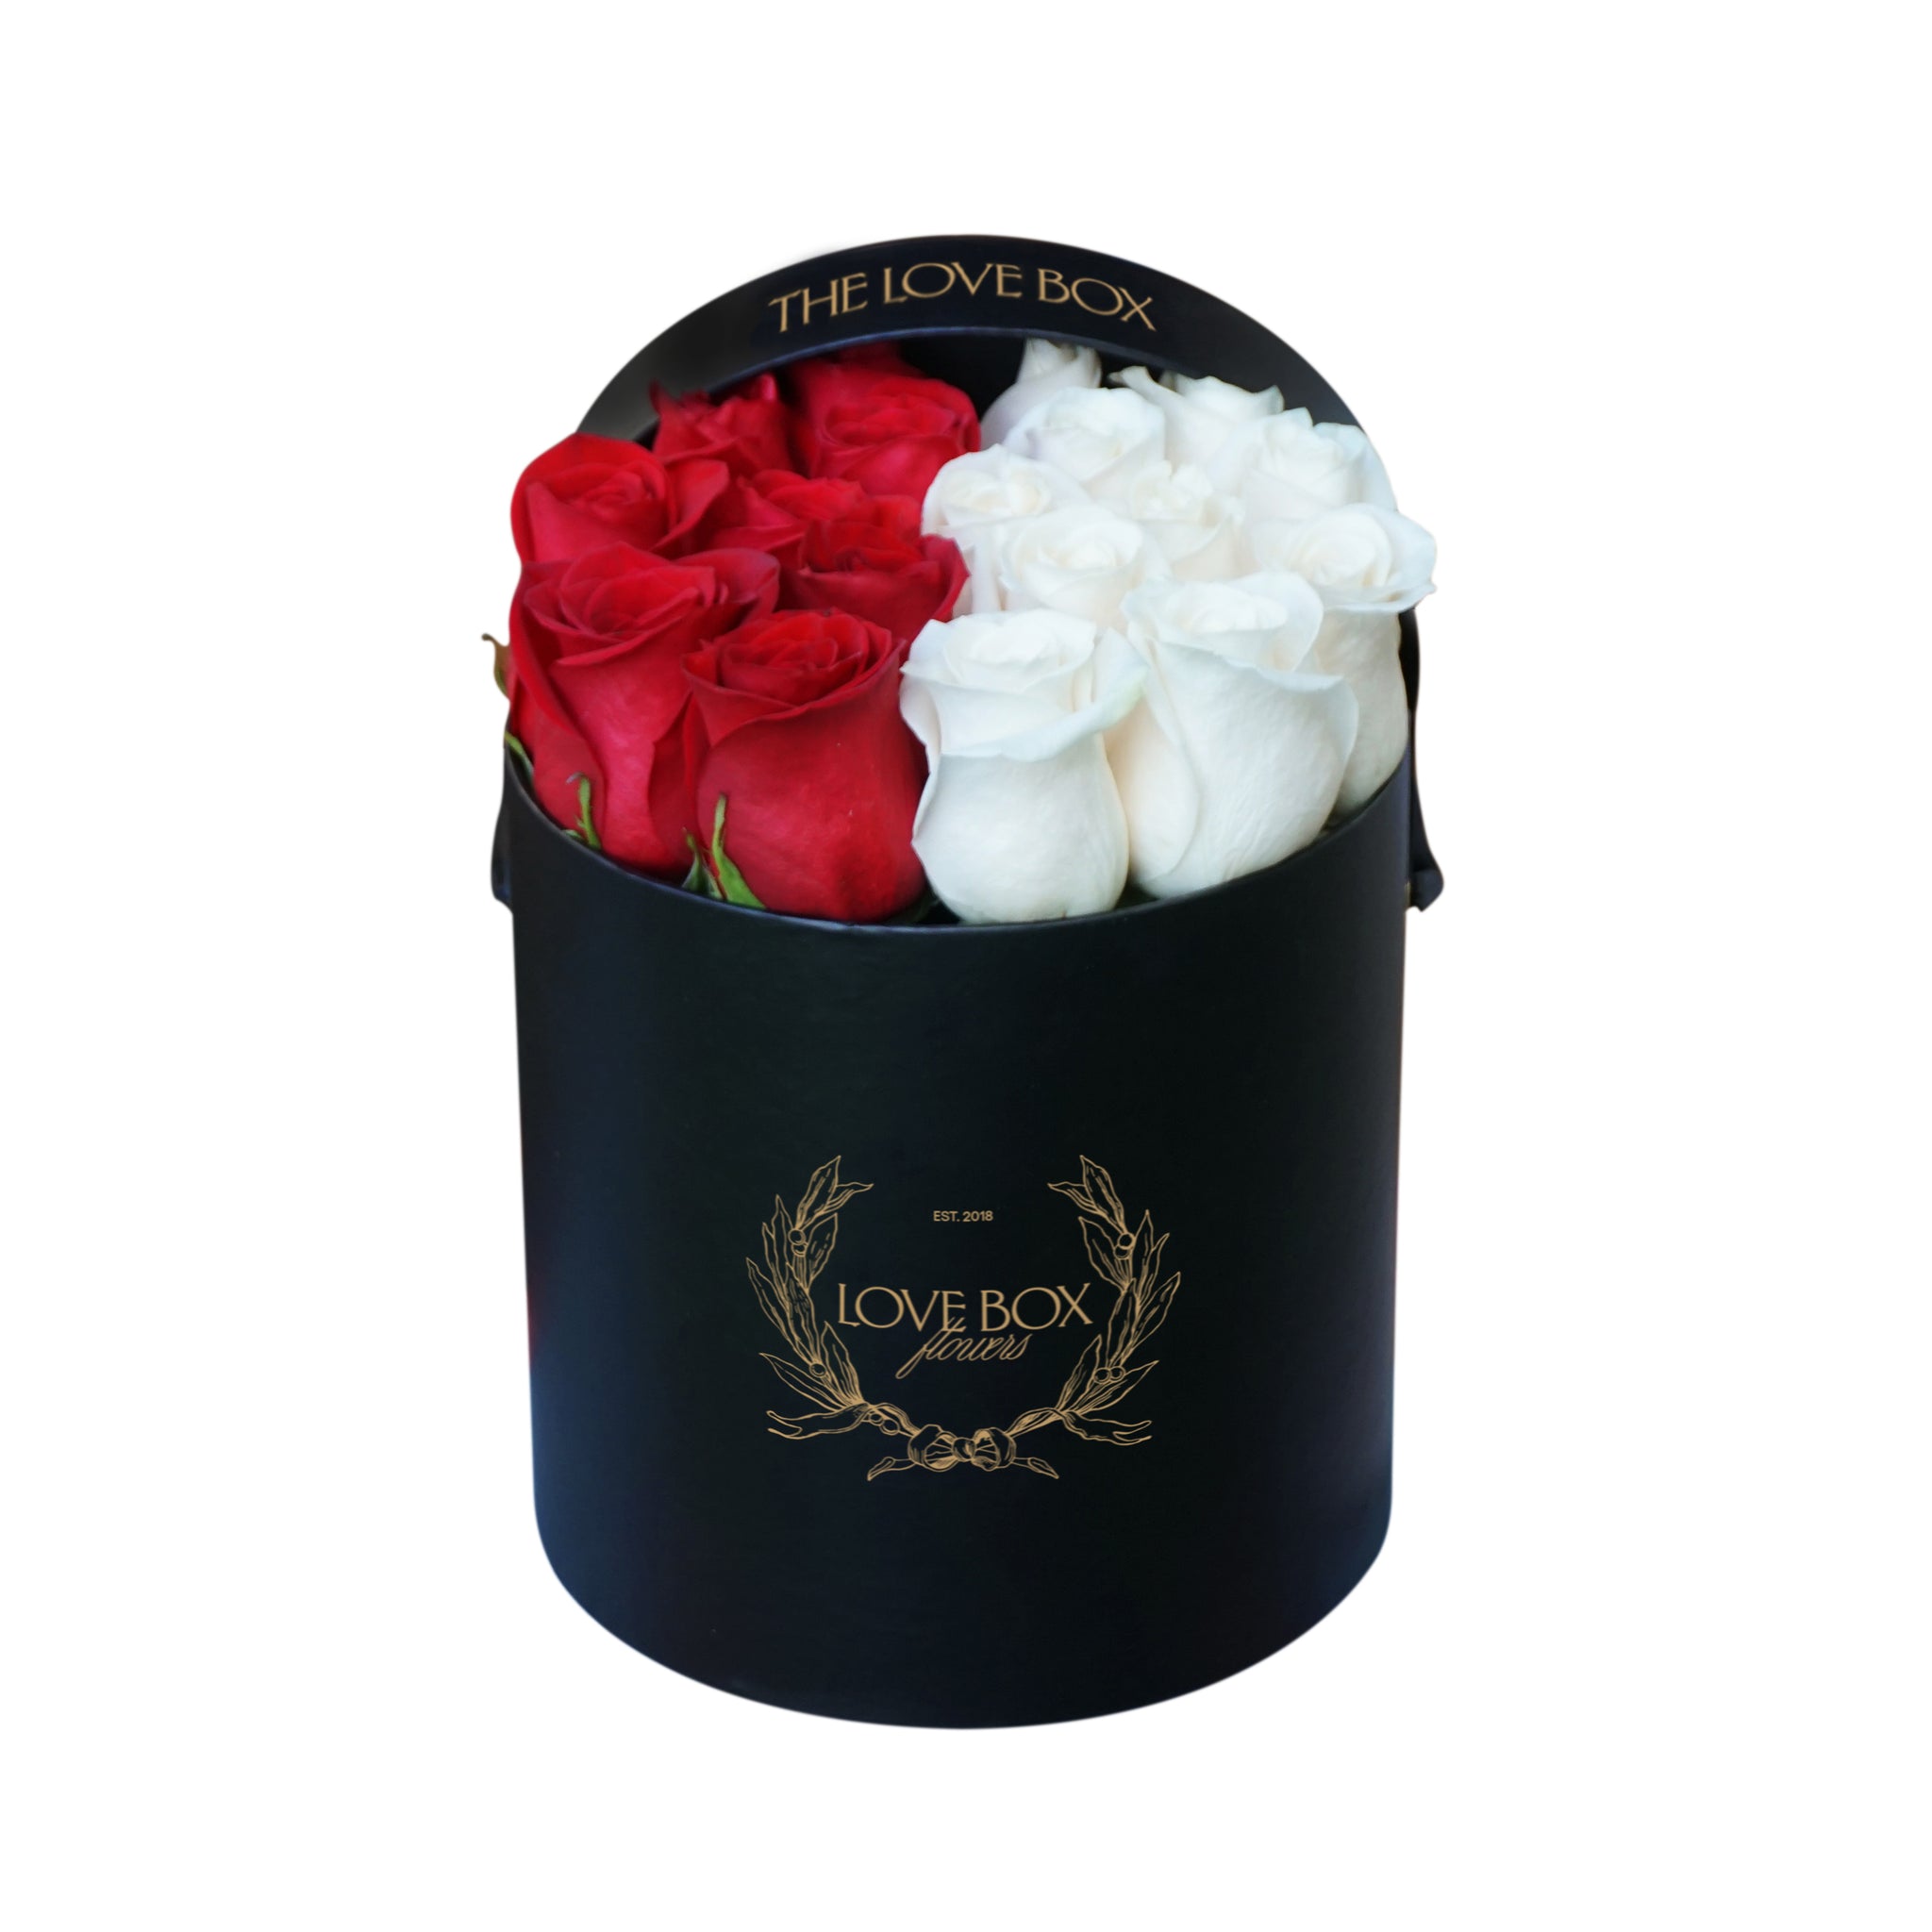 Red and White Roses in Medium Box